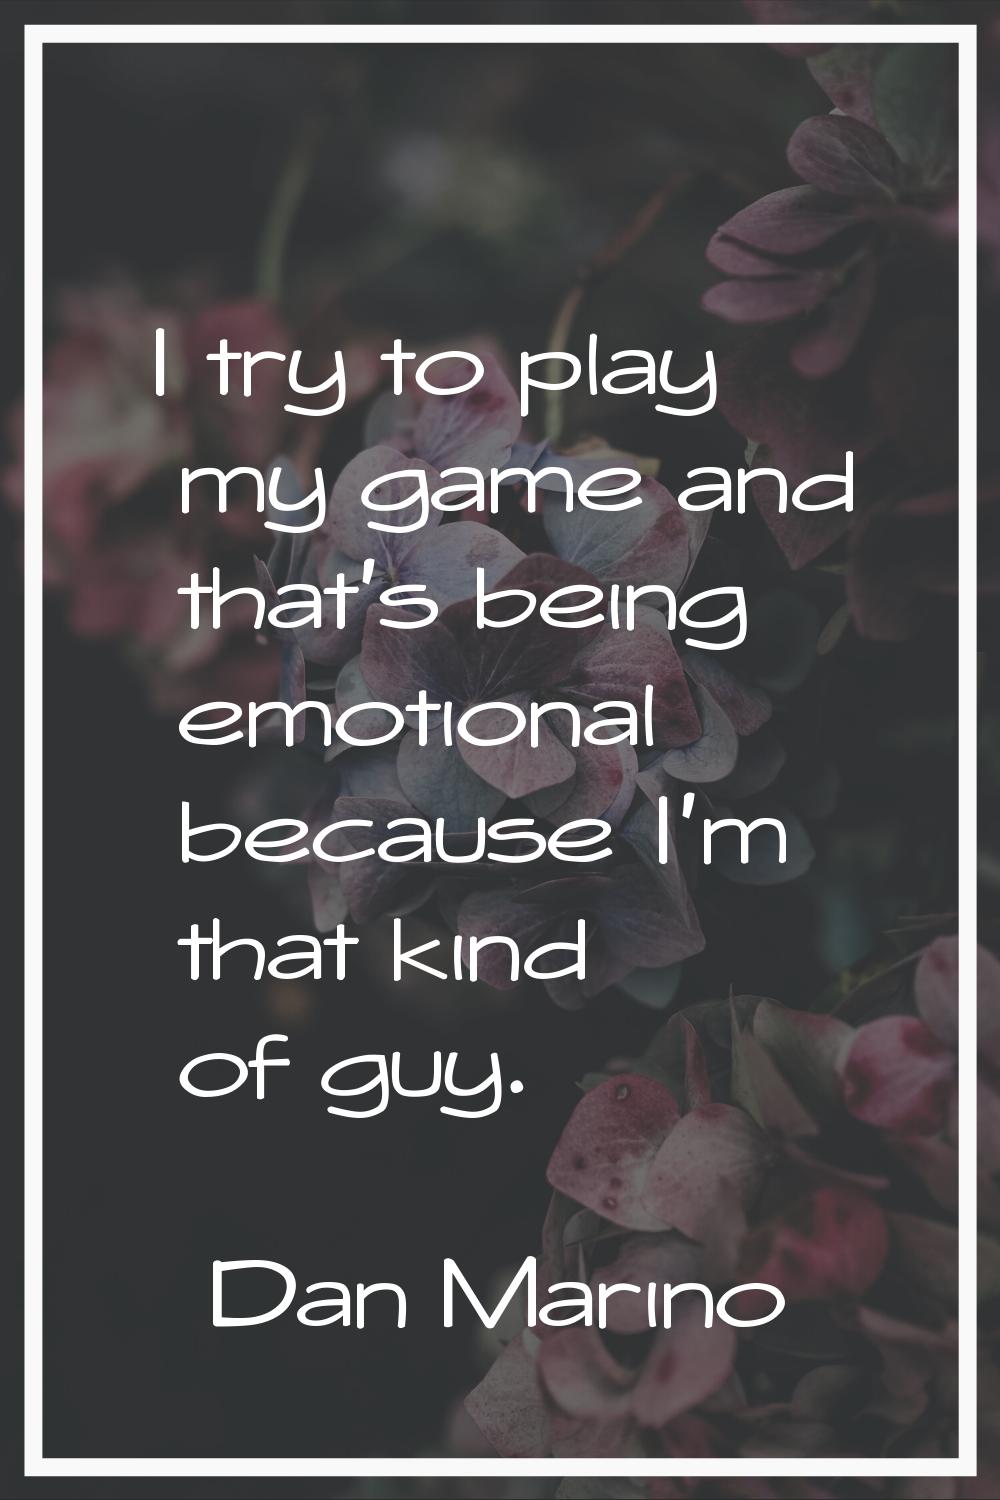 I try to play my game and that's being emotional because I'm that kind of guy.